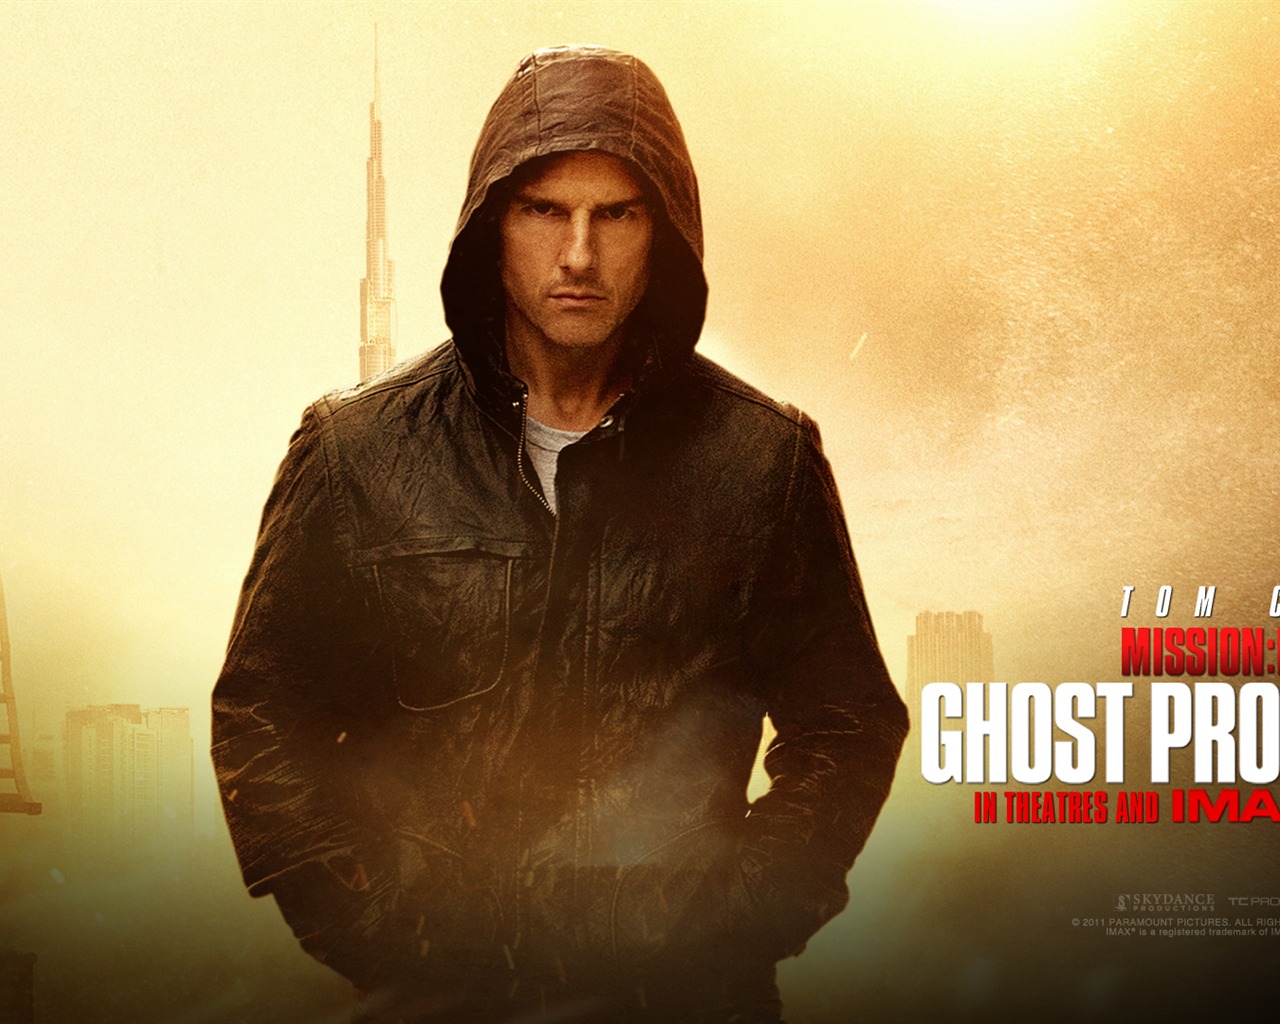 Mission: Impossible - Ghost Protocol wallpapers HD #9 - 1280x1024